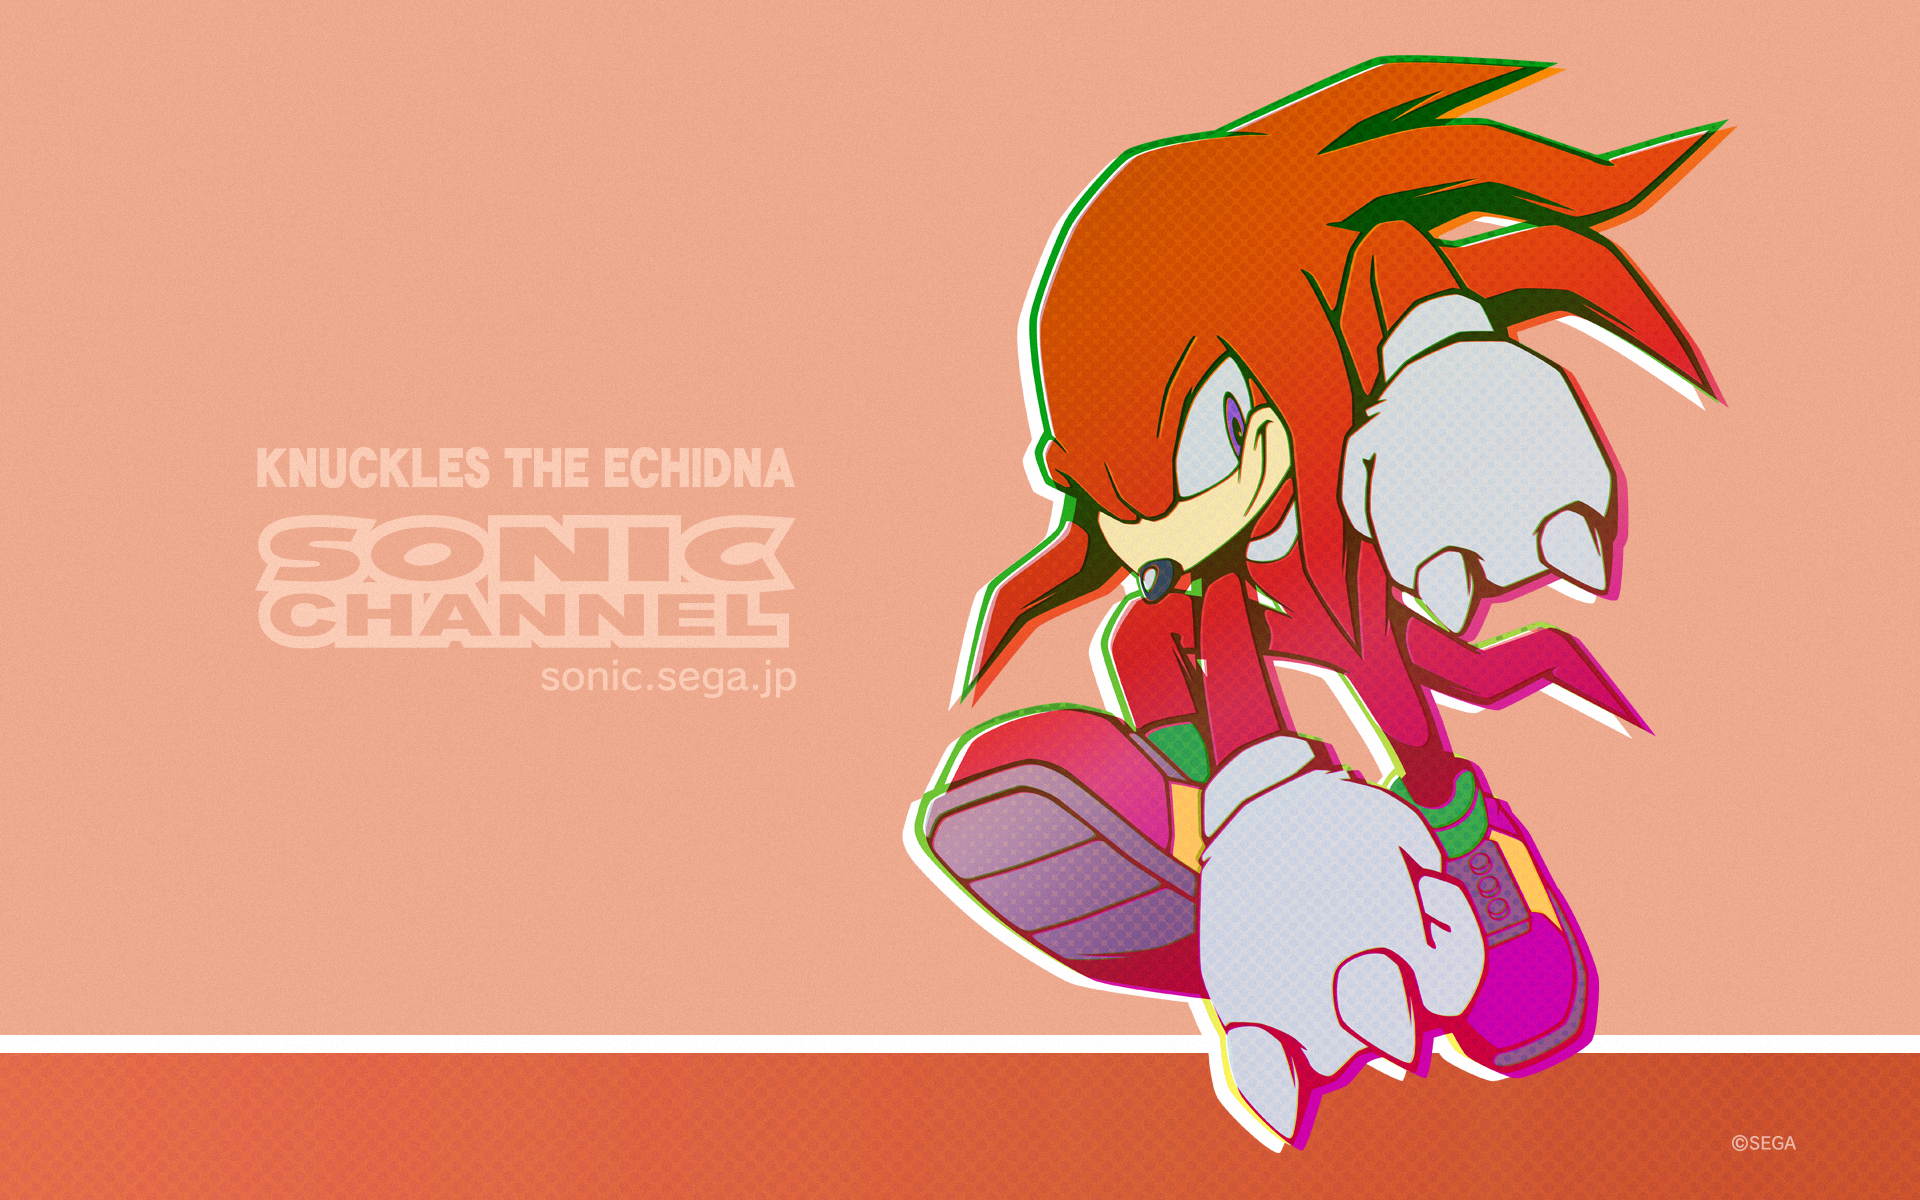 Sonic Sonic The Hedgehog Knuckles Sega Video Game Art Comic Art August Knowledge PC Gaming 1920x1200